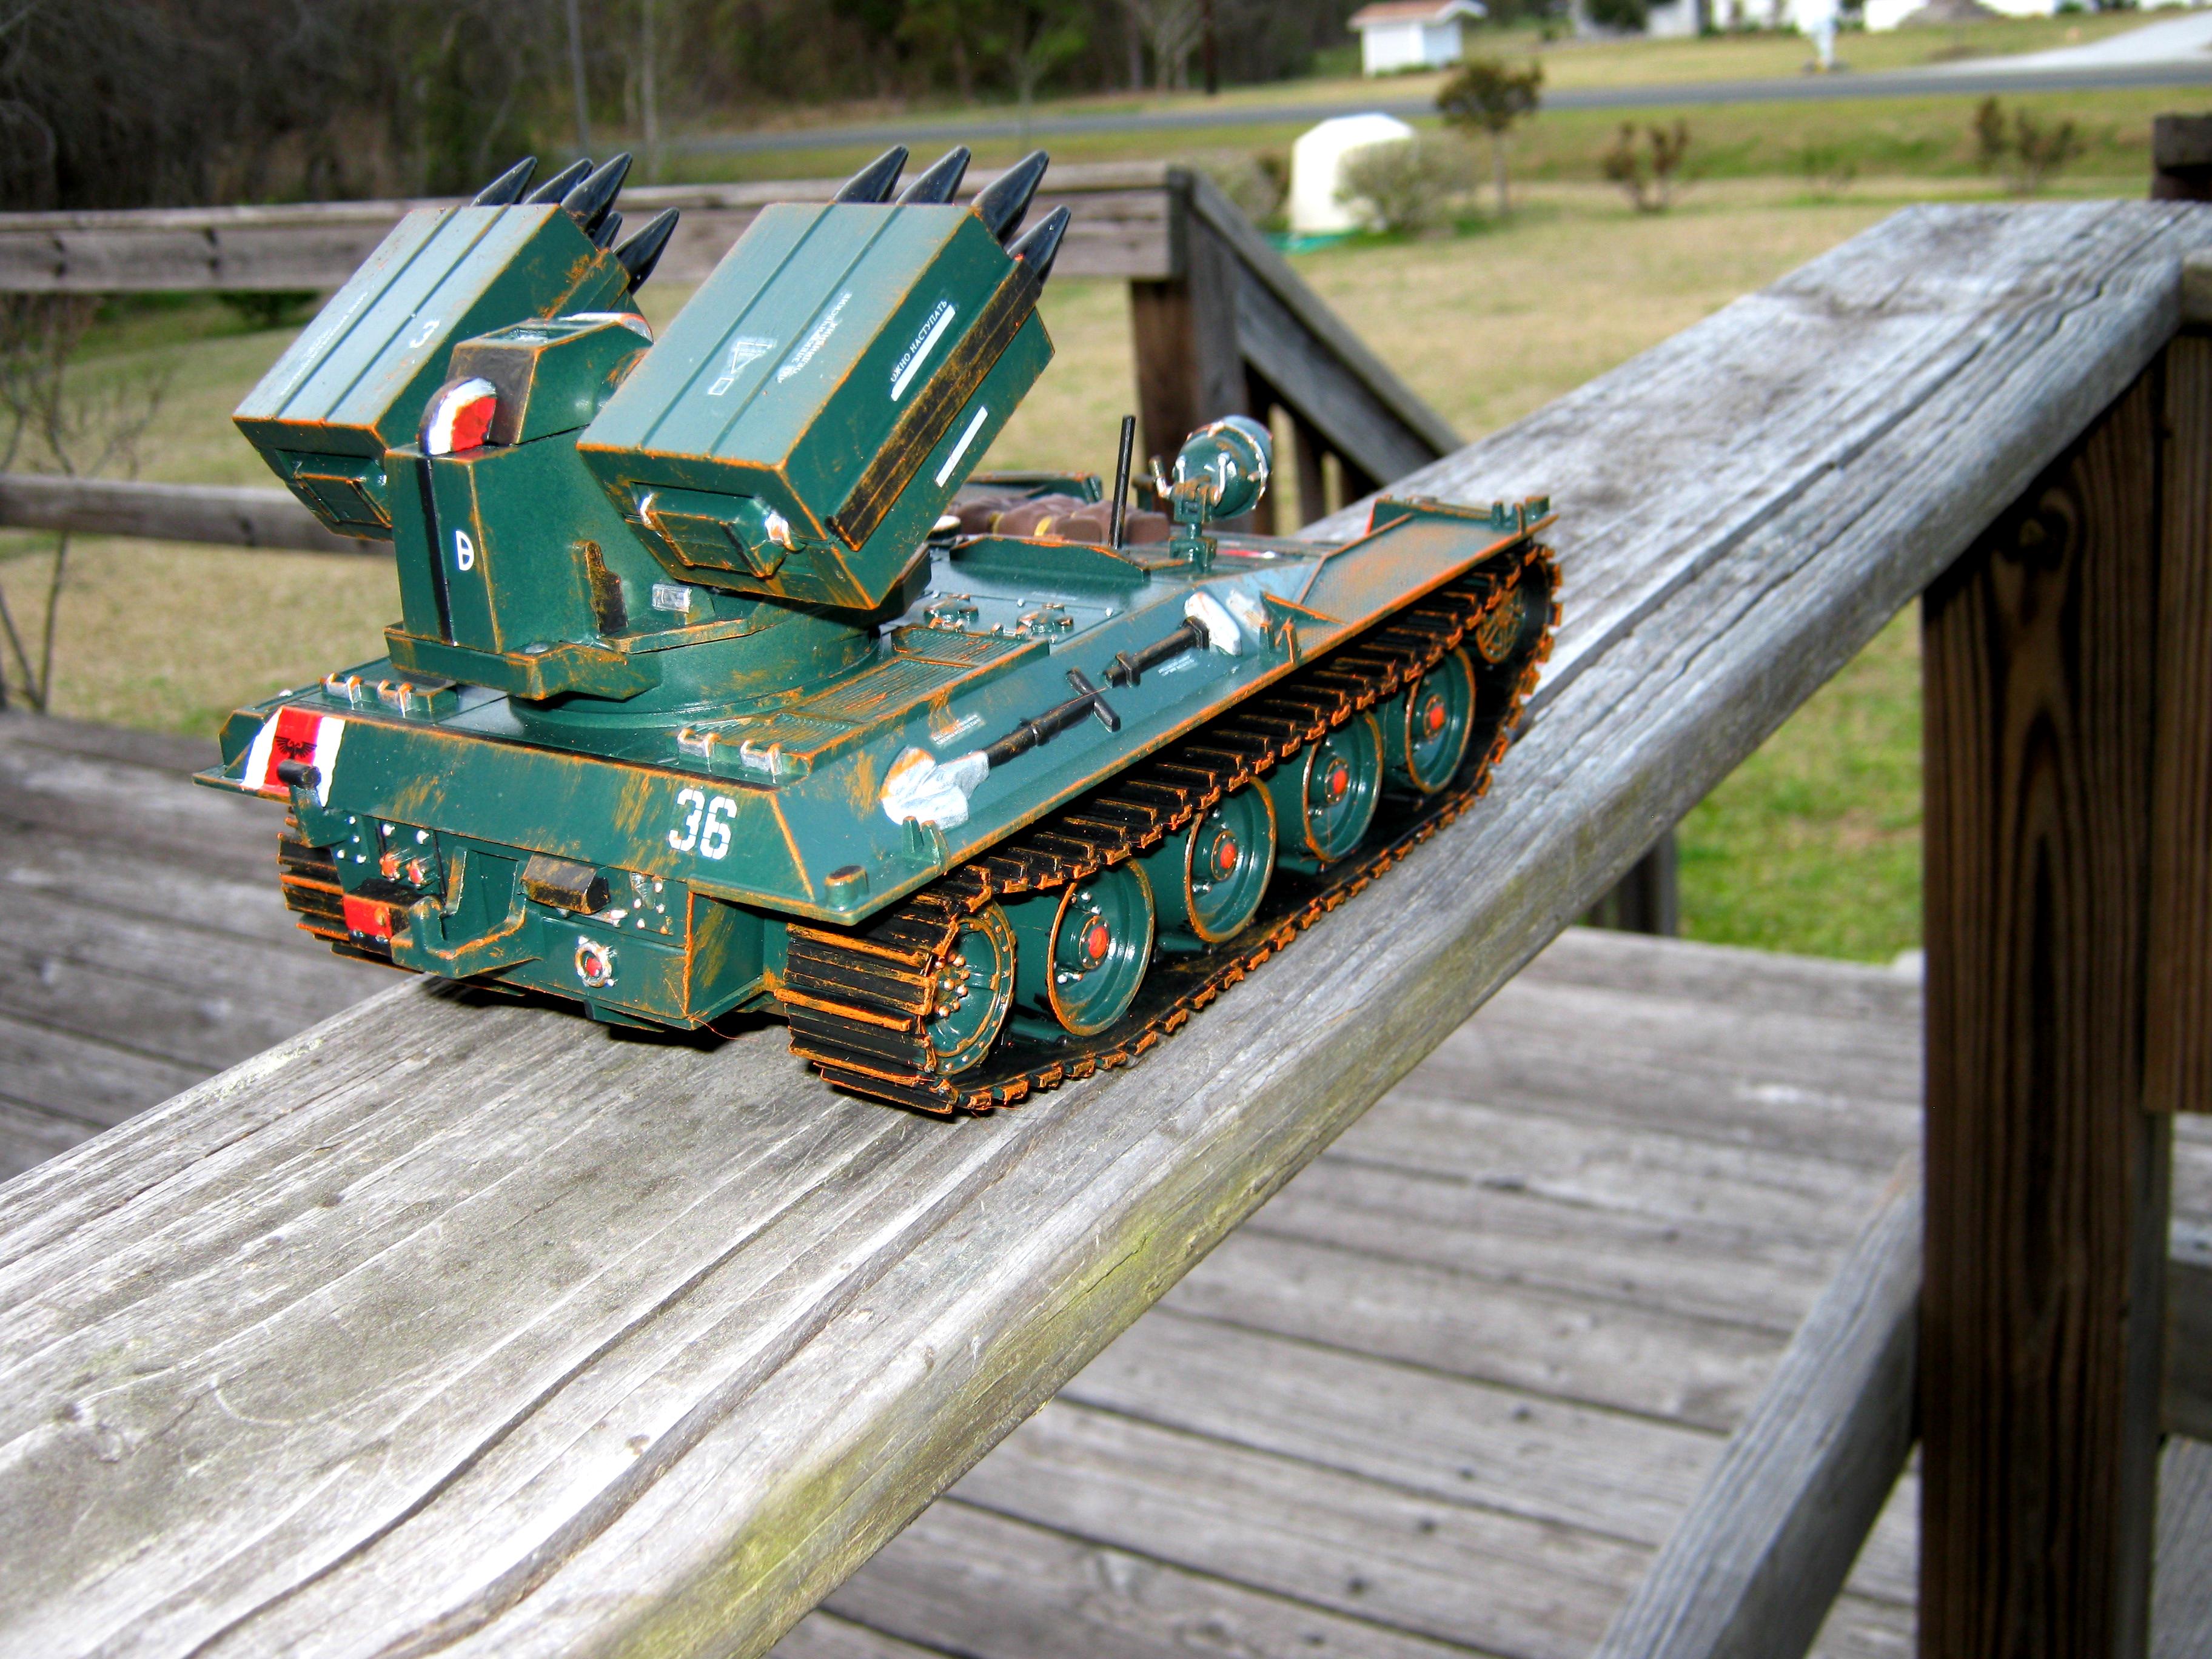 Afv, Artillery, Conversion, G.i. Joe, Imperial, Missile Launcher, Missile Tank, Self Propelled, Tank, Toy, Wolverine